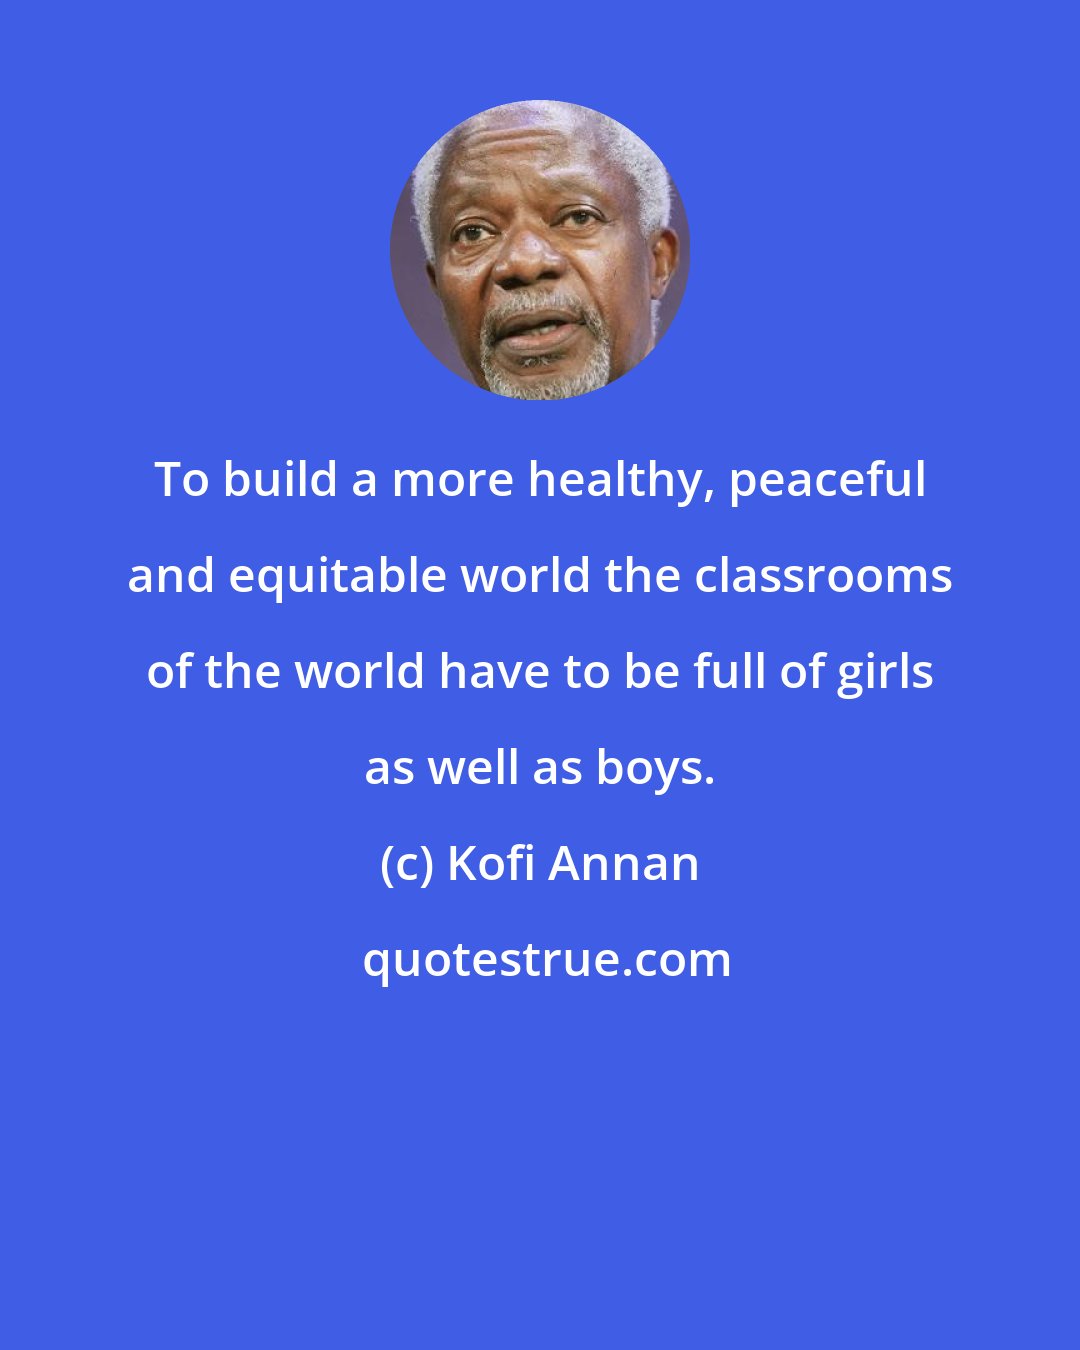 Kofi Annan: To build a more healthy, peaceful and equitable world the classrooms of the world have to be full of girls as well as boys.